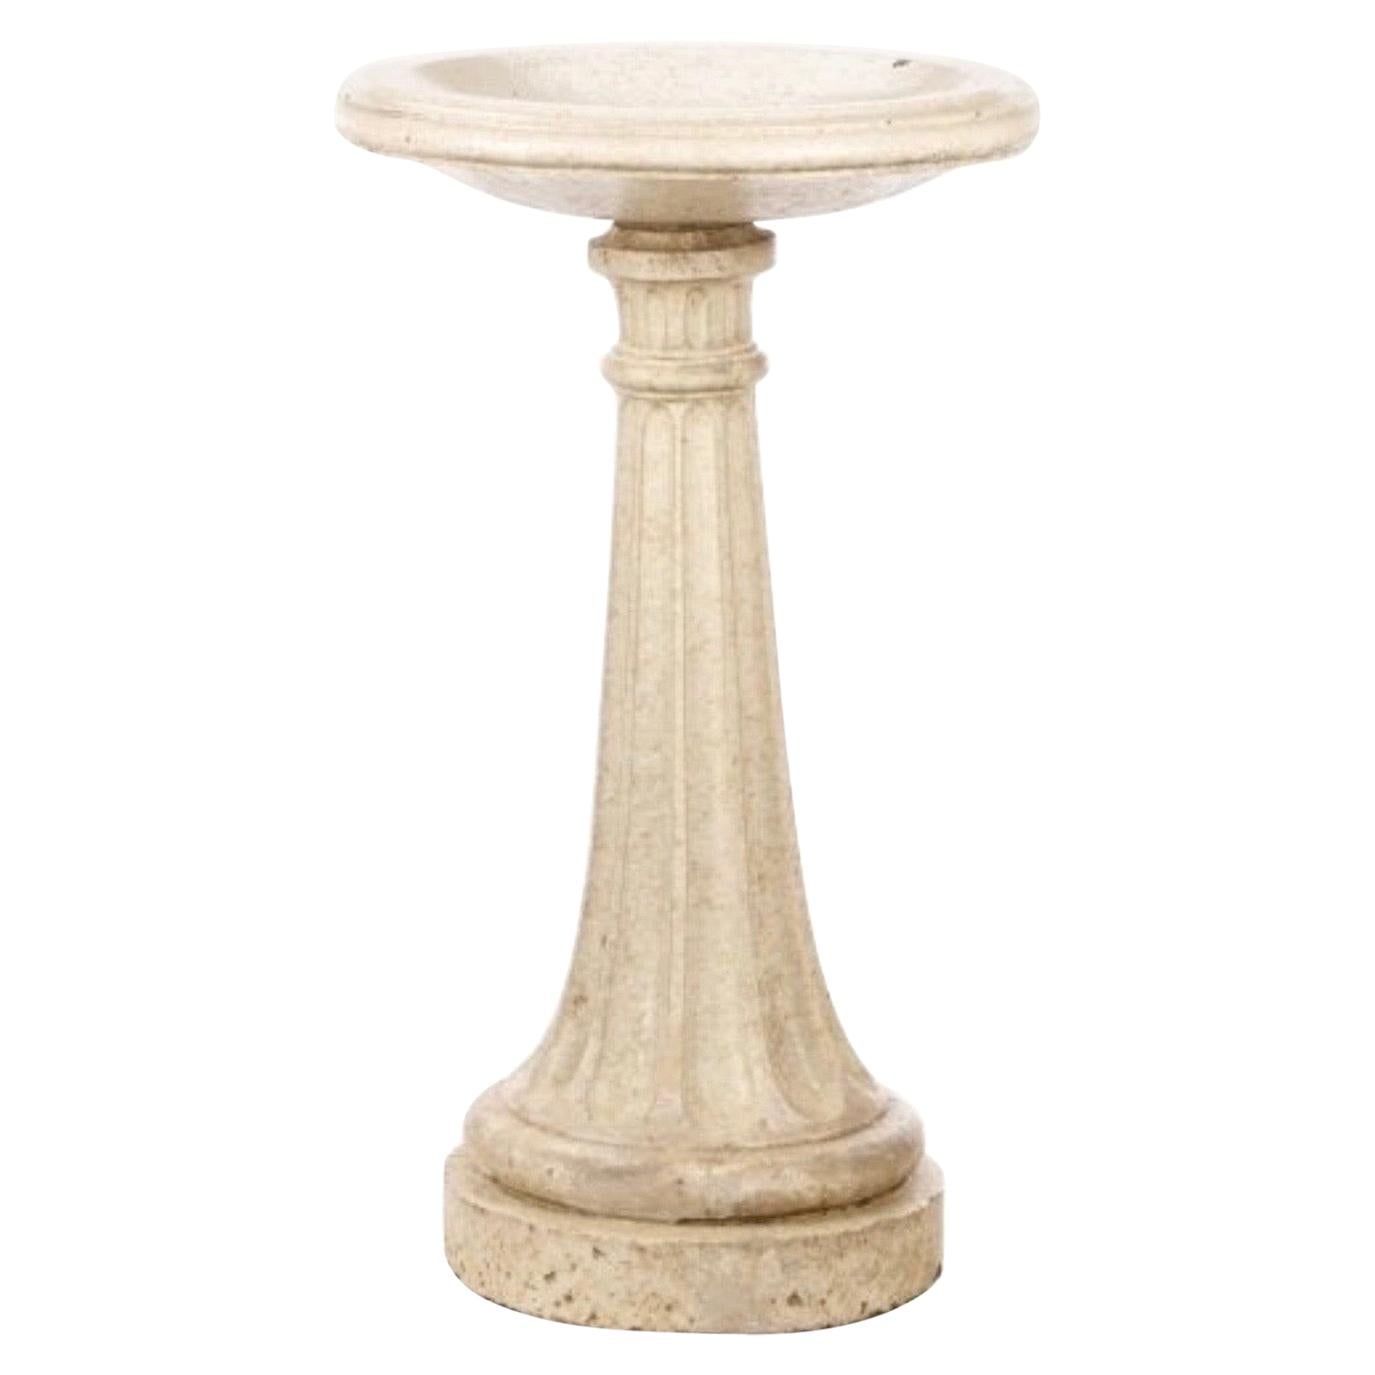 Early 20th Century Neoclassical Glazed Terracotta and Plaster Bird Bath